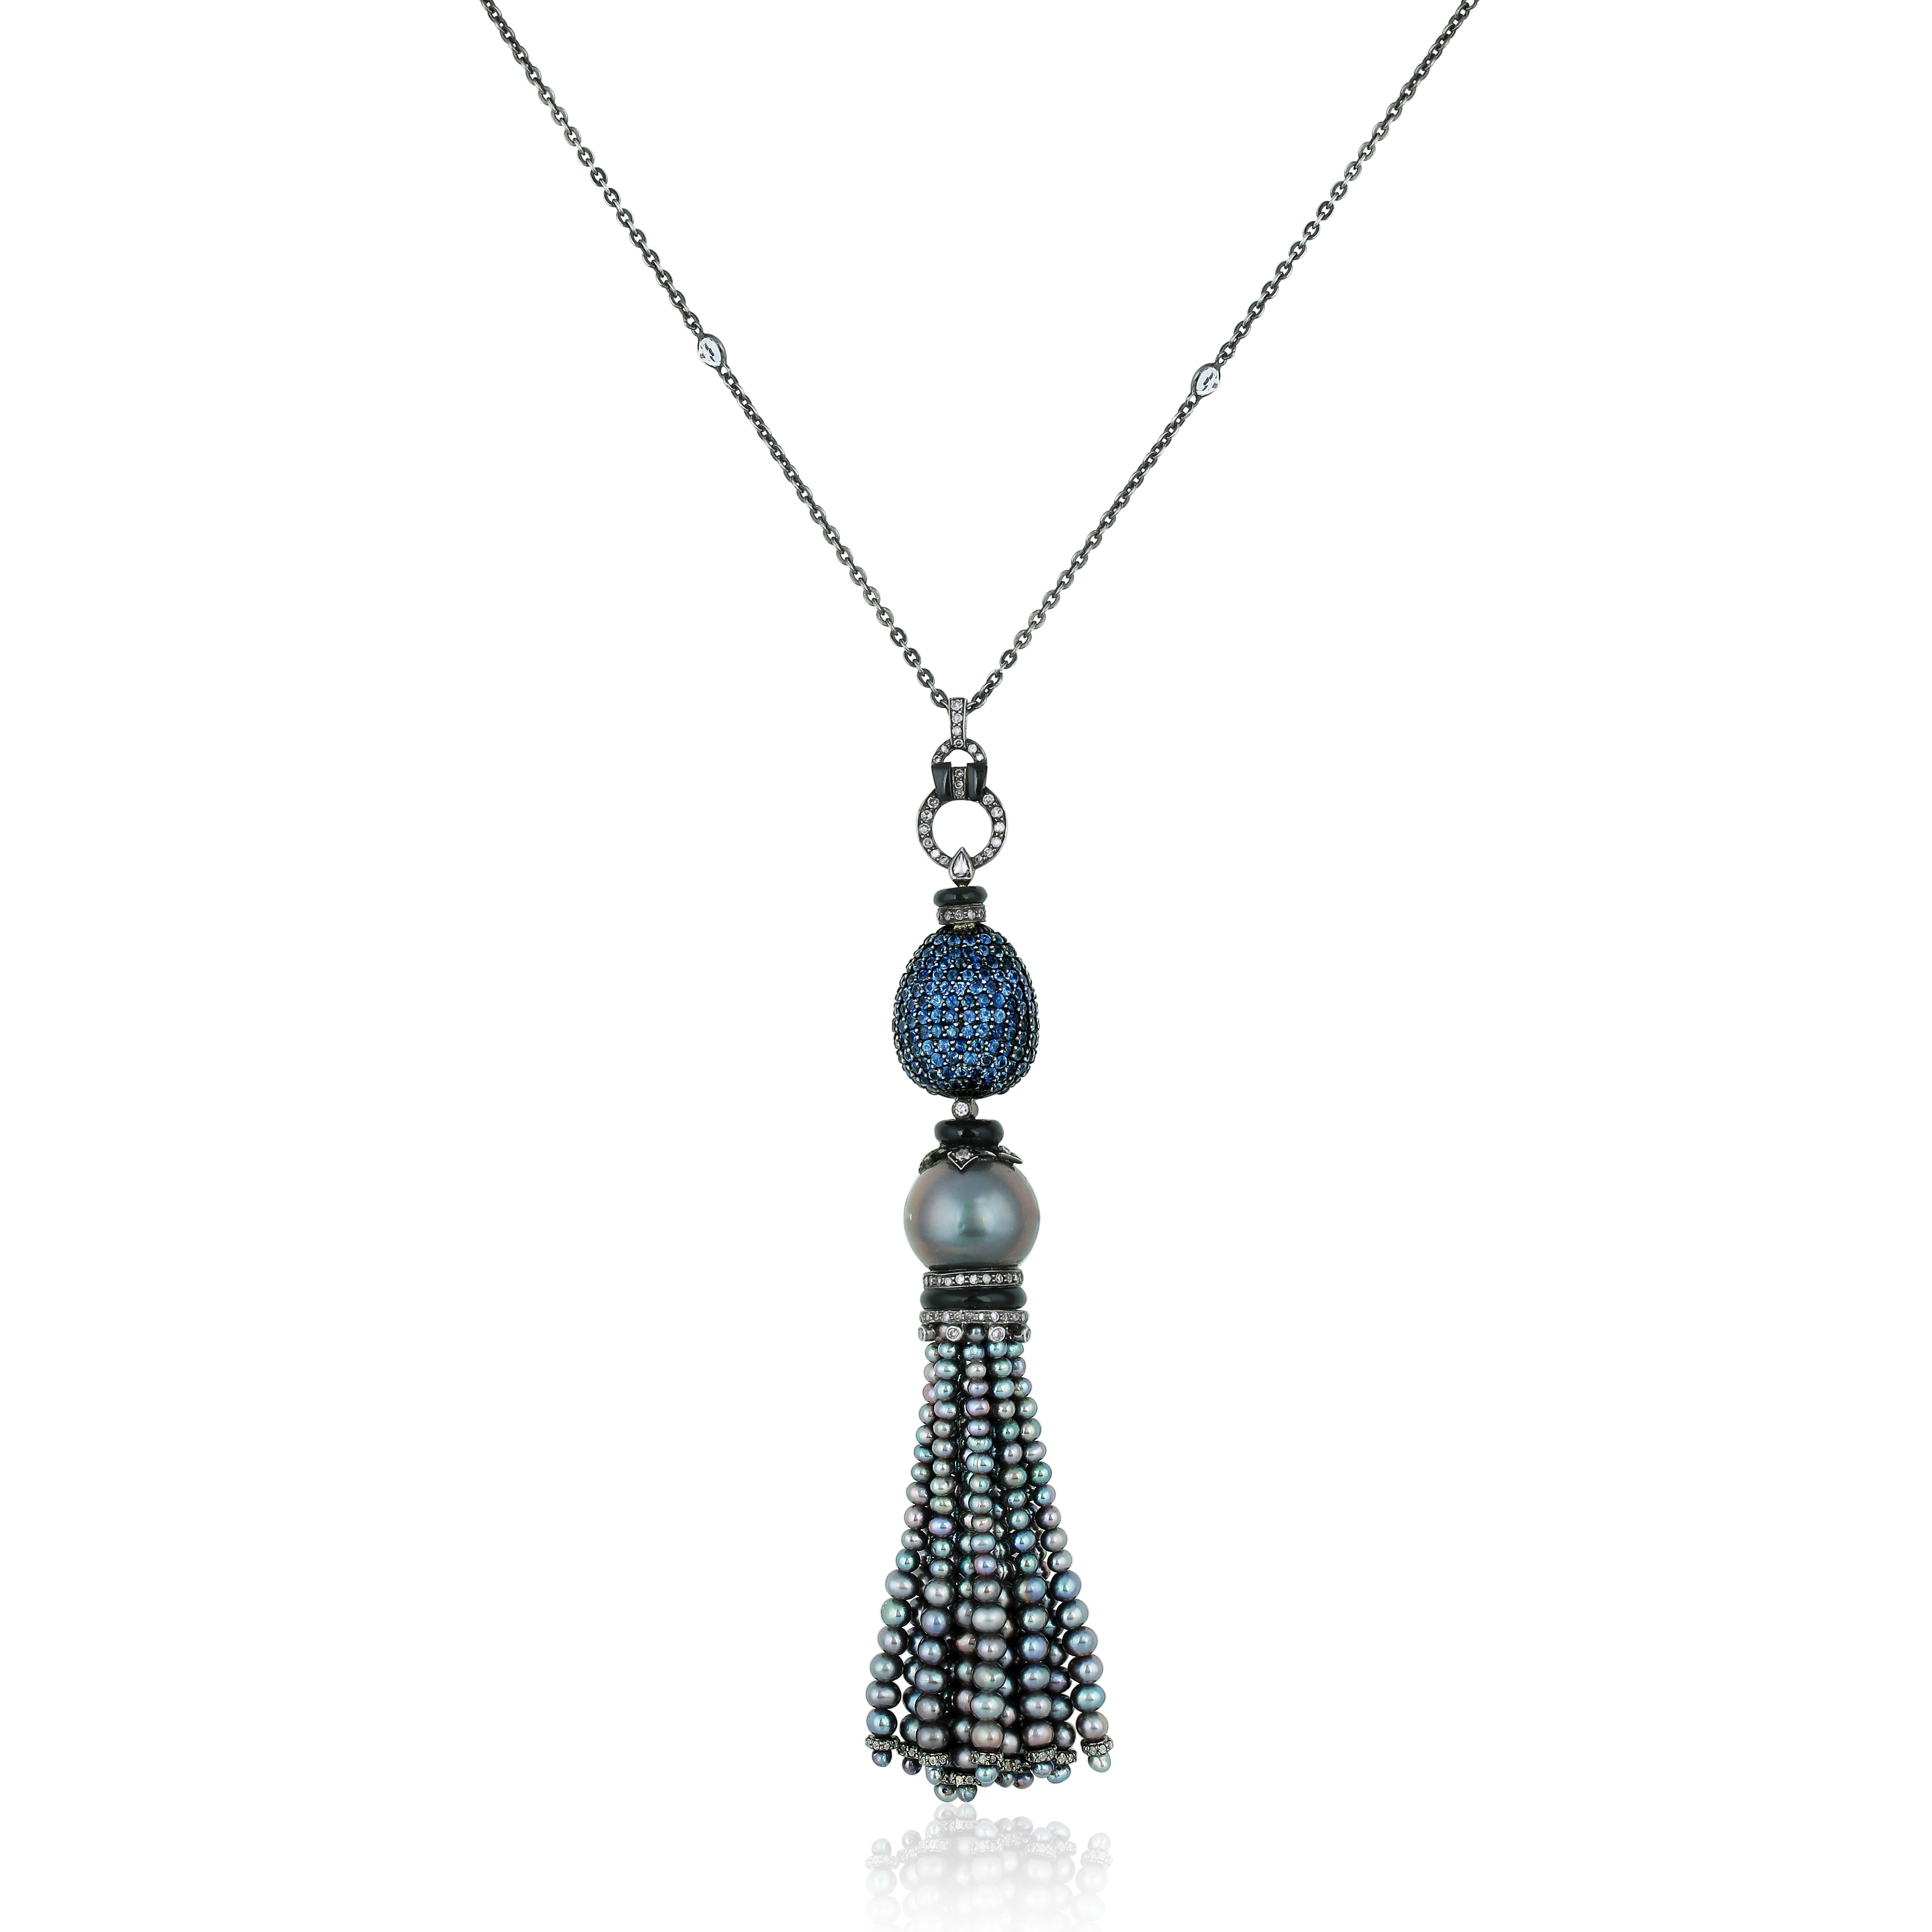 Round Cut 16 Ct T.W. Sapphire and Diamond Victorian Tassel Necklace with Pearls in 18k/925 For Sale